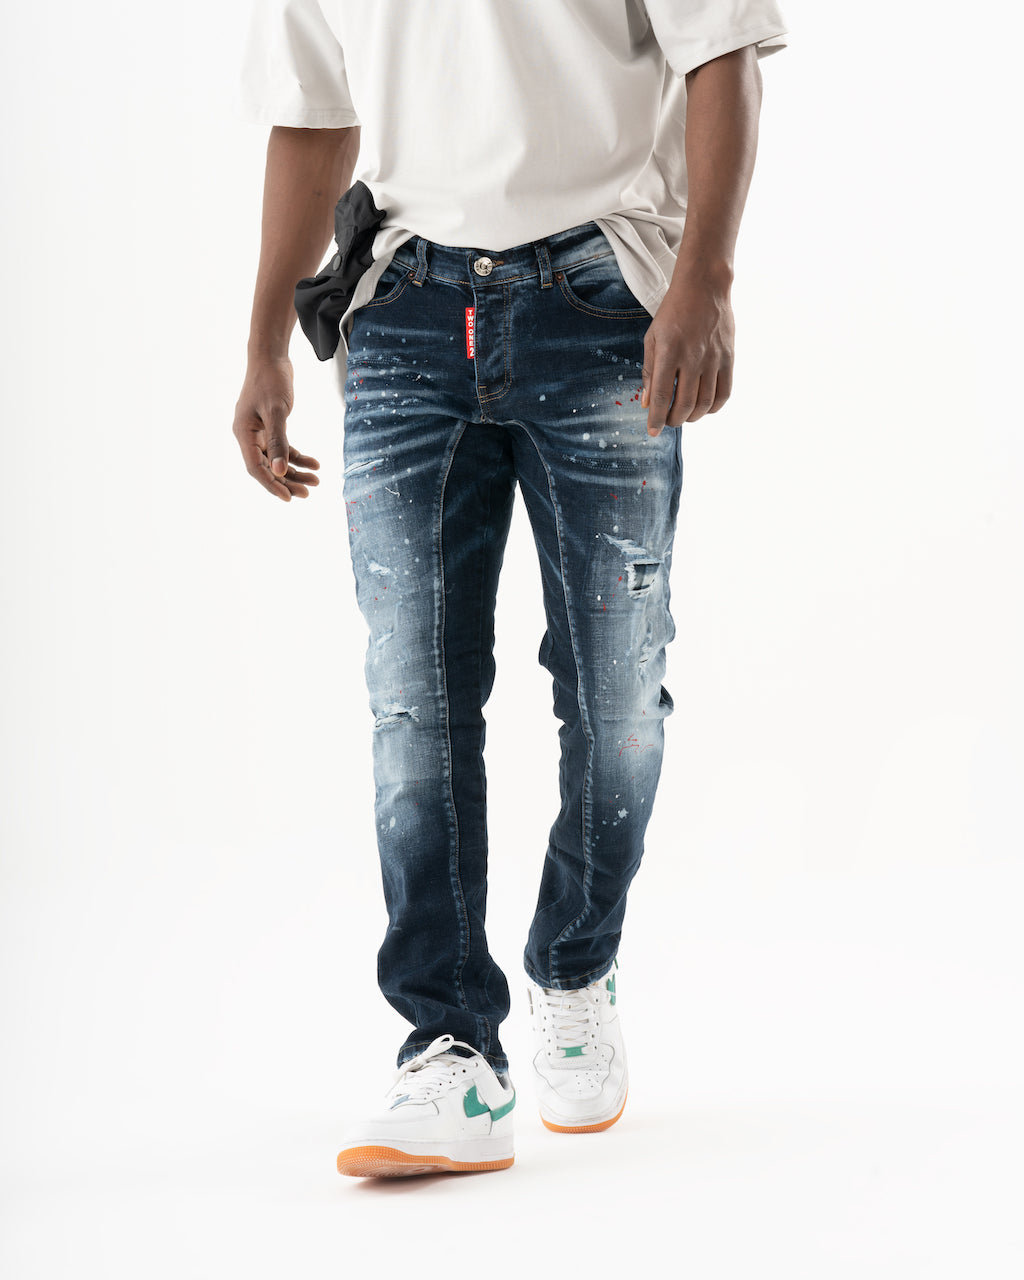 A man wearing STARLIGHT jeans and a white t-shirt.